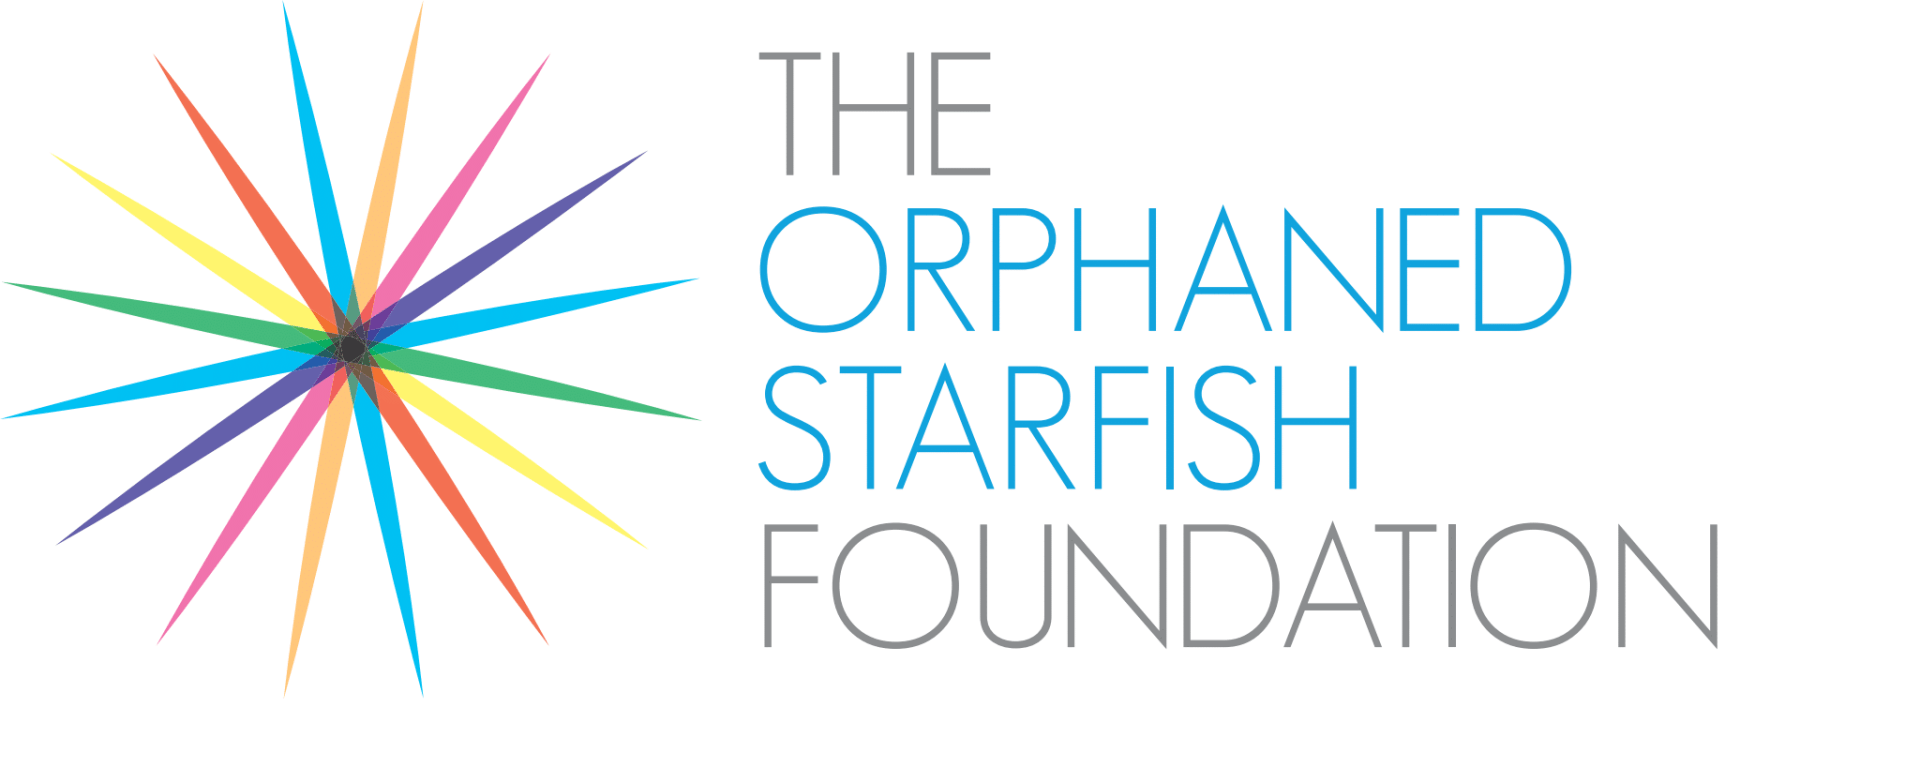 The logo for the orphaned starfish foundation with a colorful star in the middle.